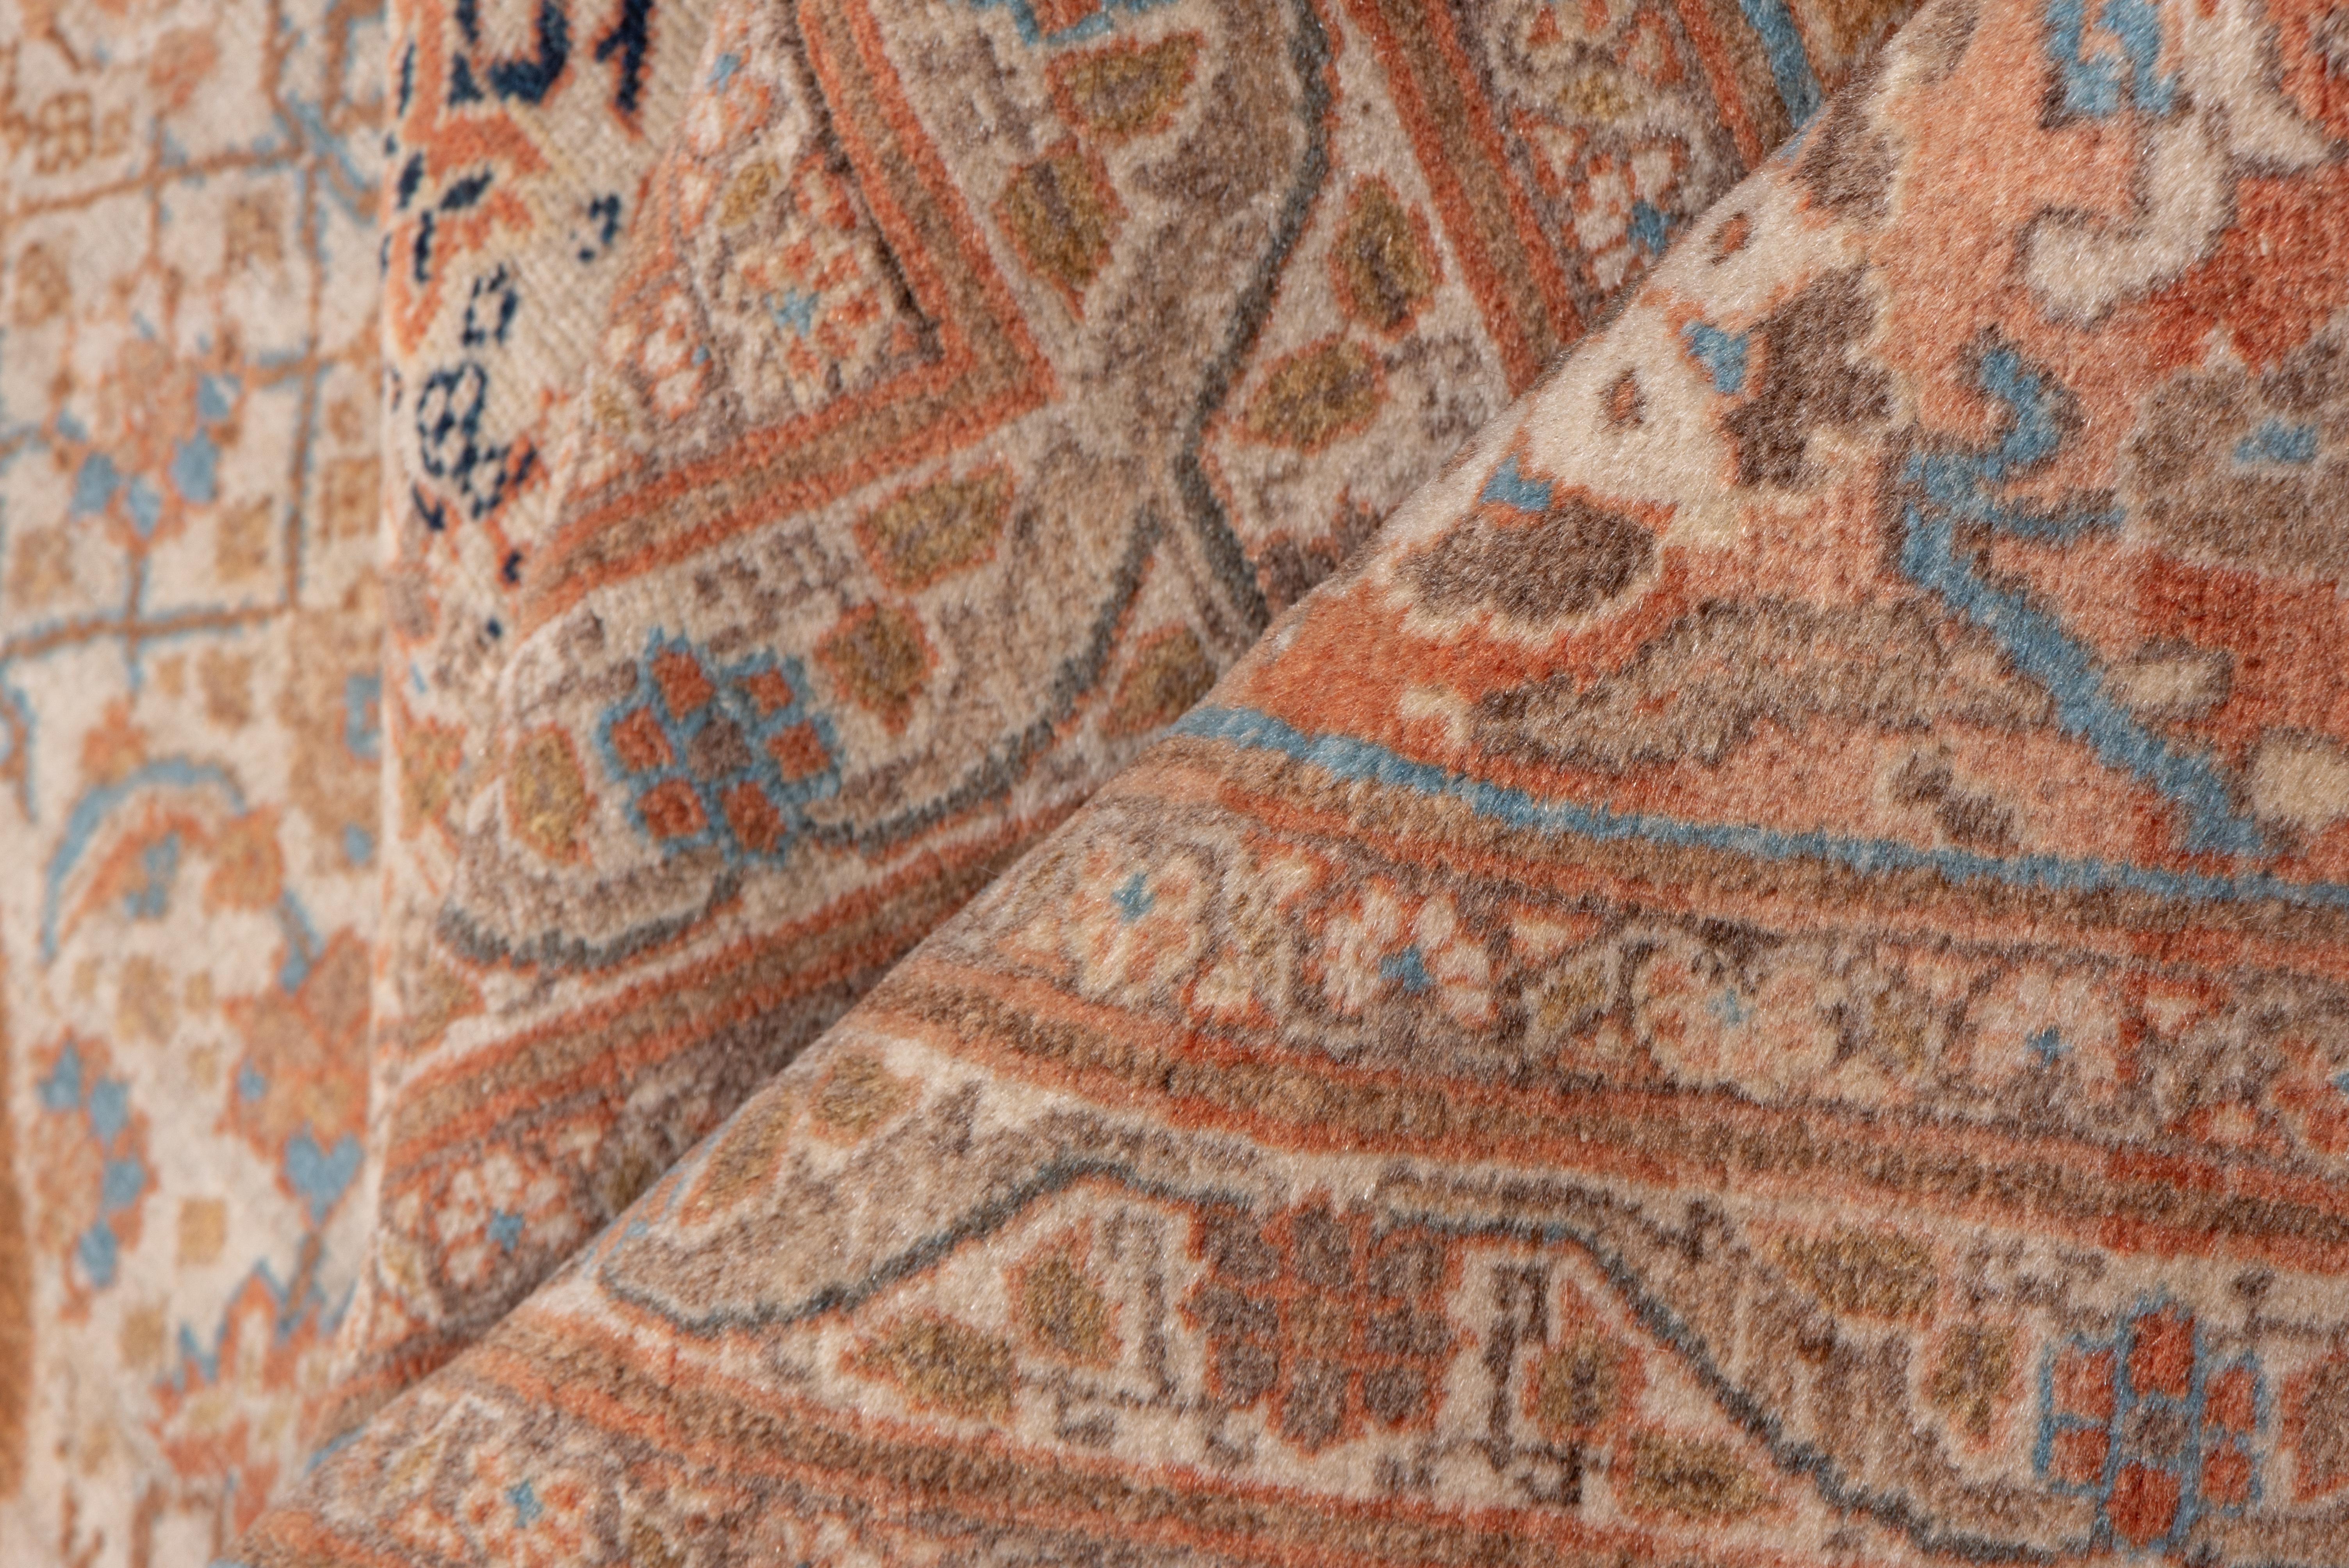 This NW Persian ultra-urbane city carpet features a layered 